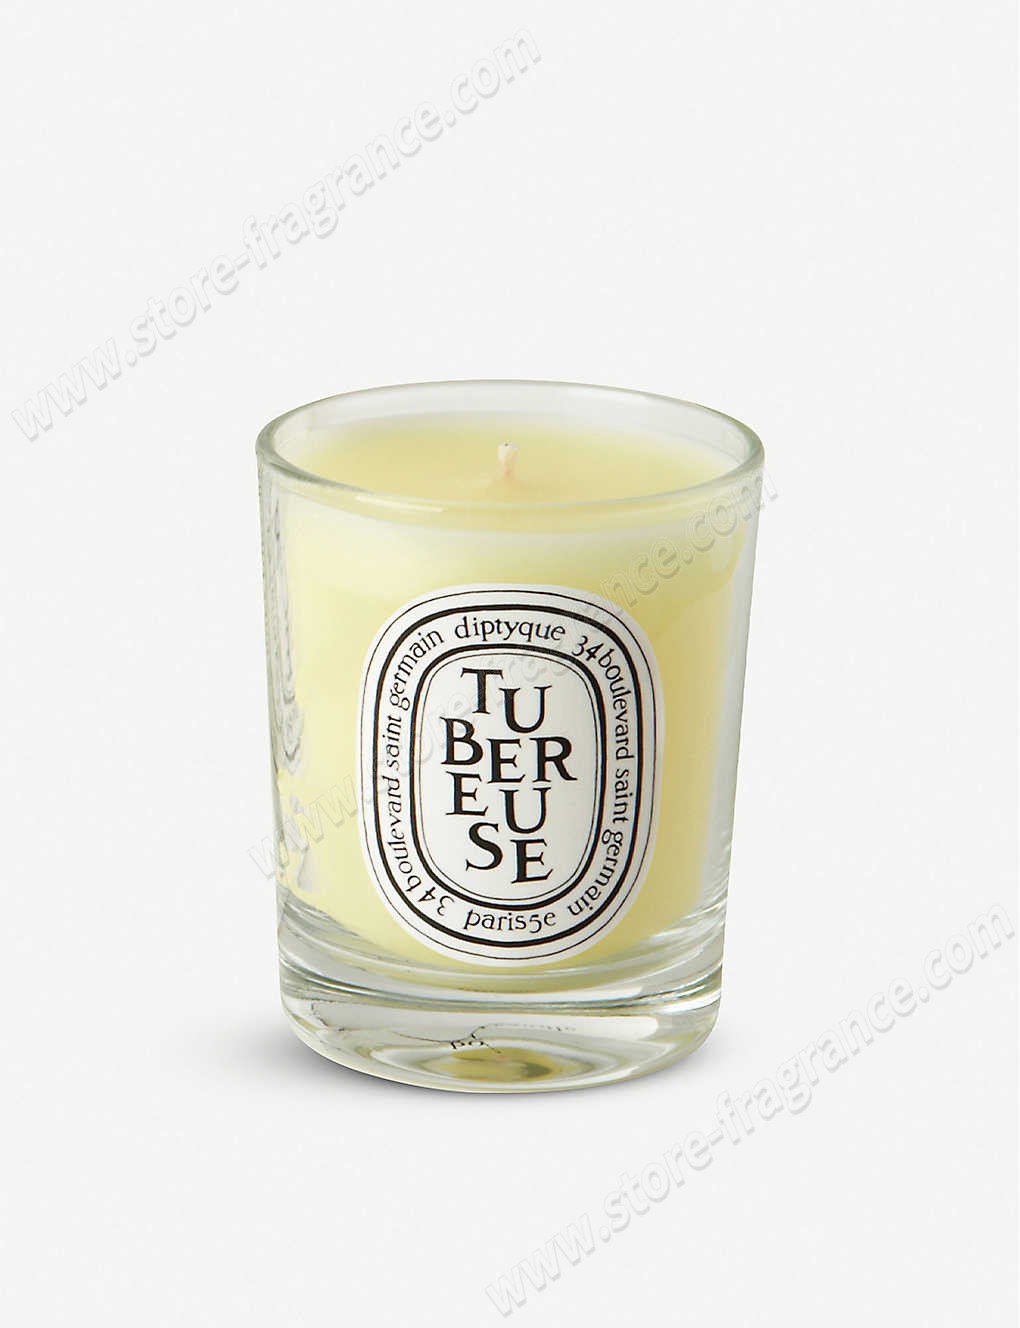 DIPTYQUE/Tuberose mini scented candle ✿ Discount Store - DIPTYQUE/Tuberose mini scented candle ✿ Discount Store